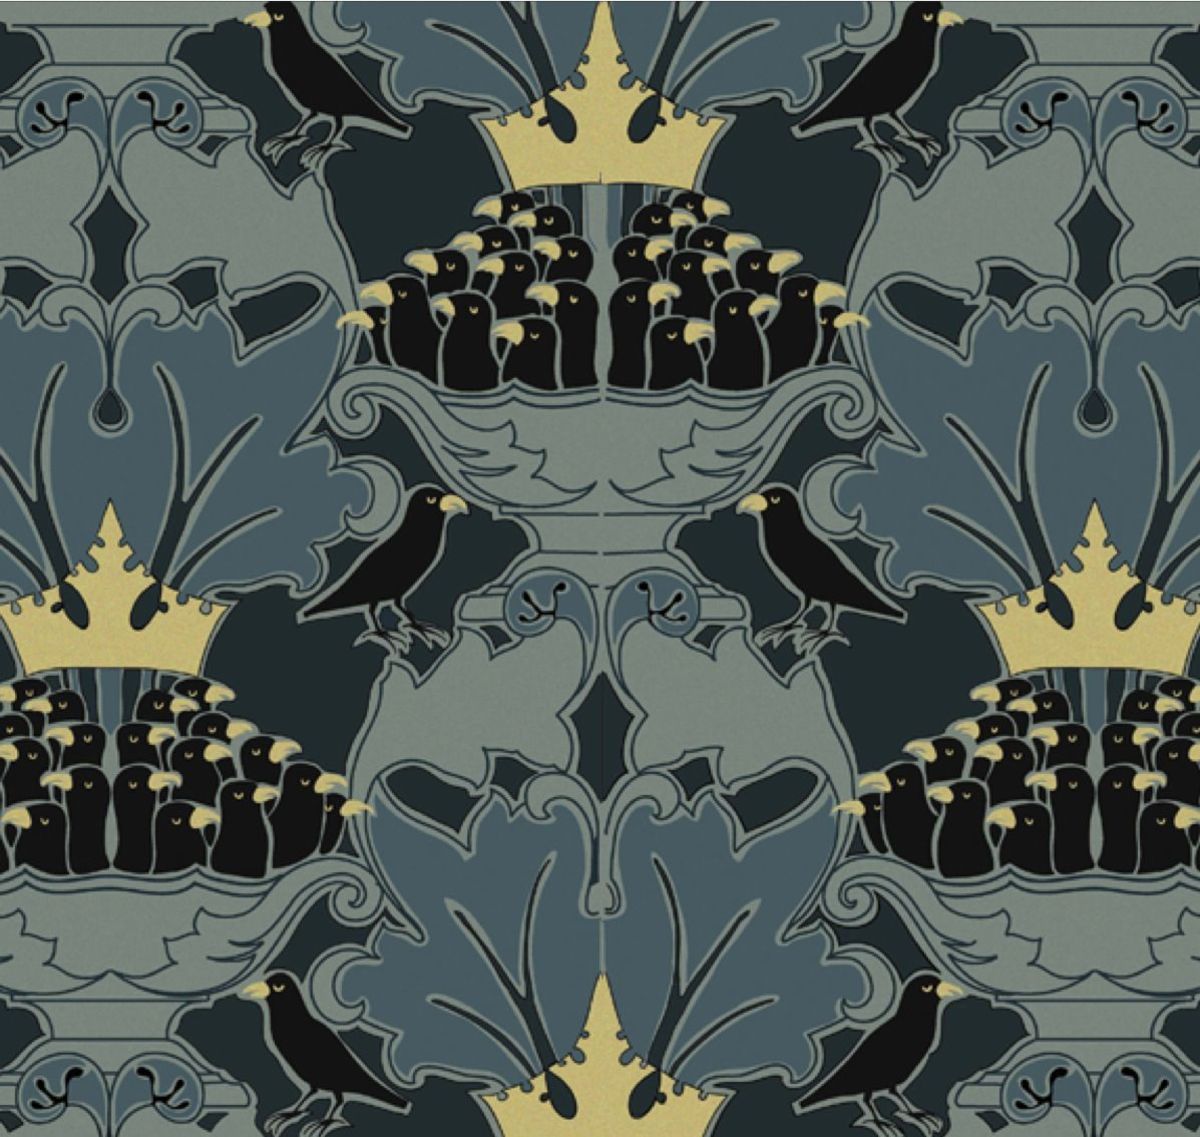 Trustworth Studios’ “Four and Twenty” scalable paper in teal, black, and gold, after a Voysey design.